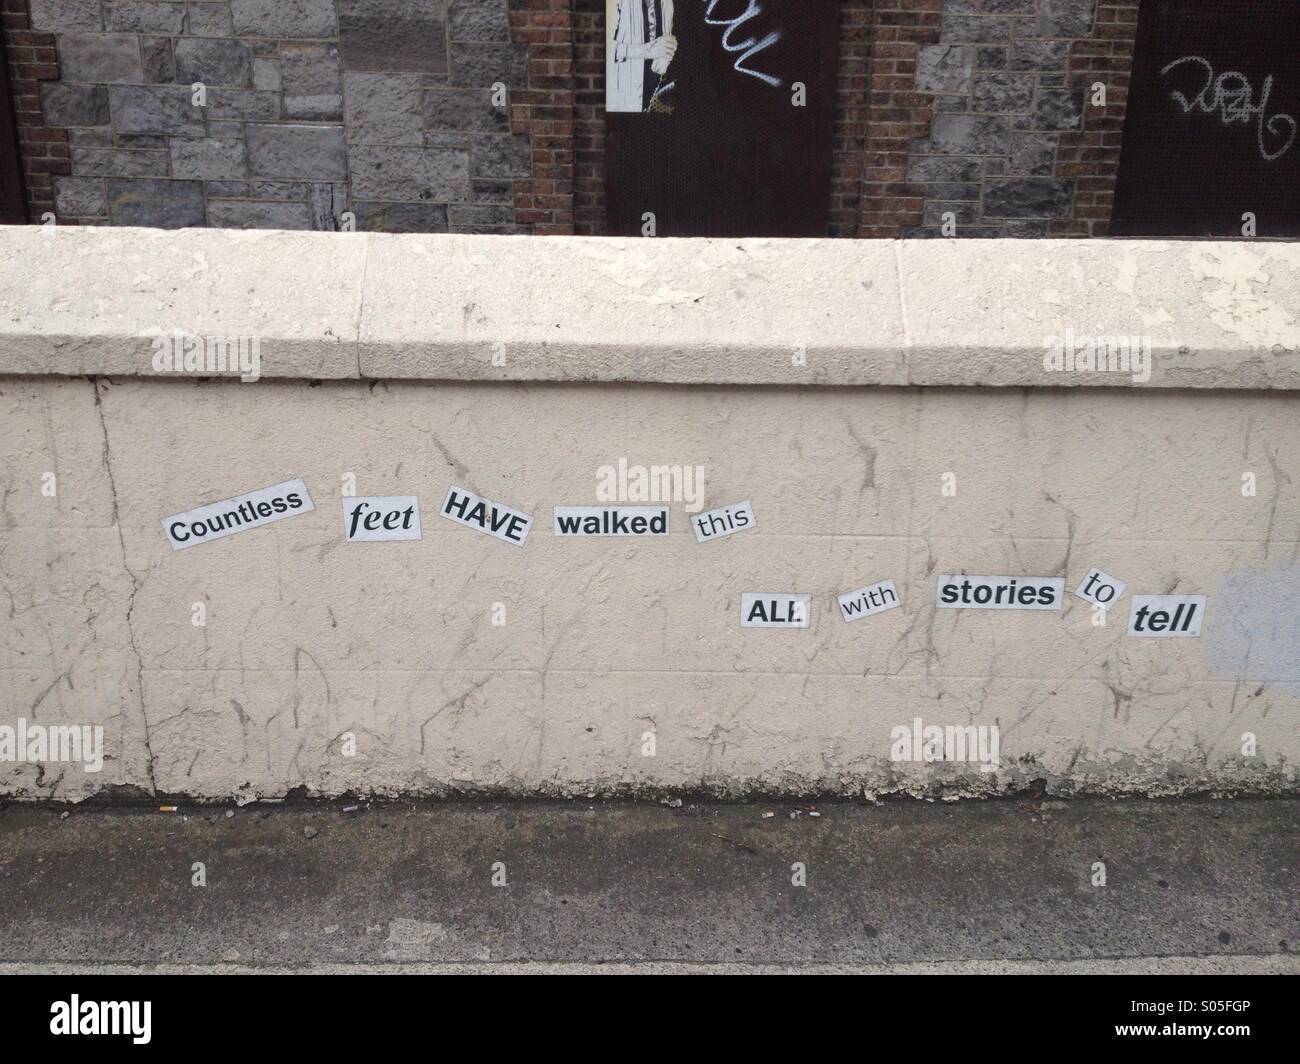 Street art on a wall in Dublin city, Ireland reading 'Countless feet have walked this all with stories to tell' Stock Photo